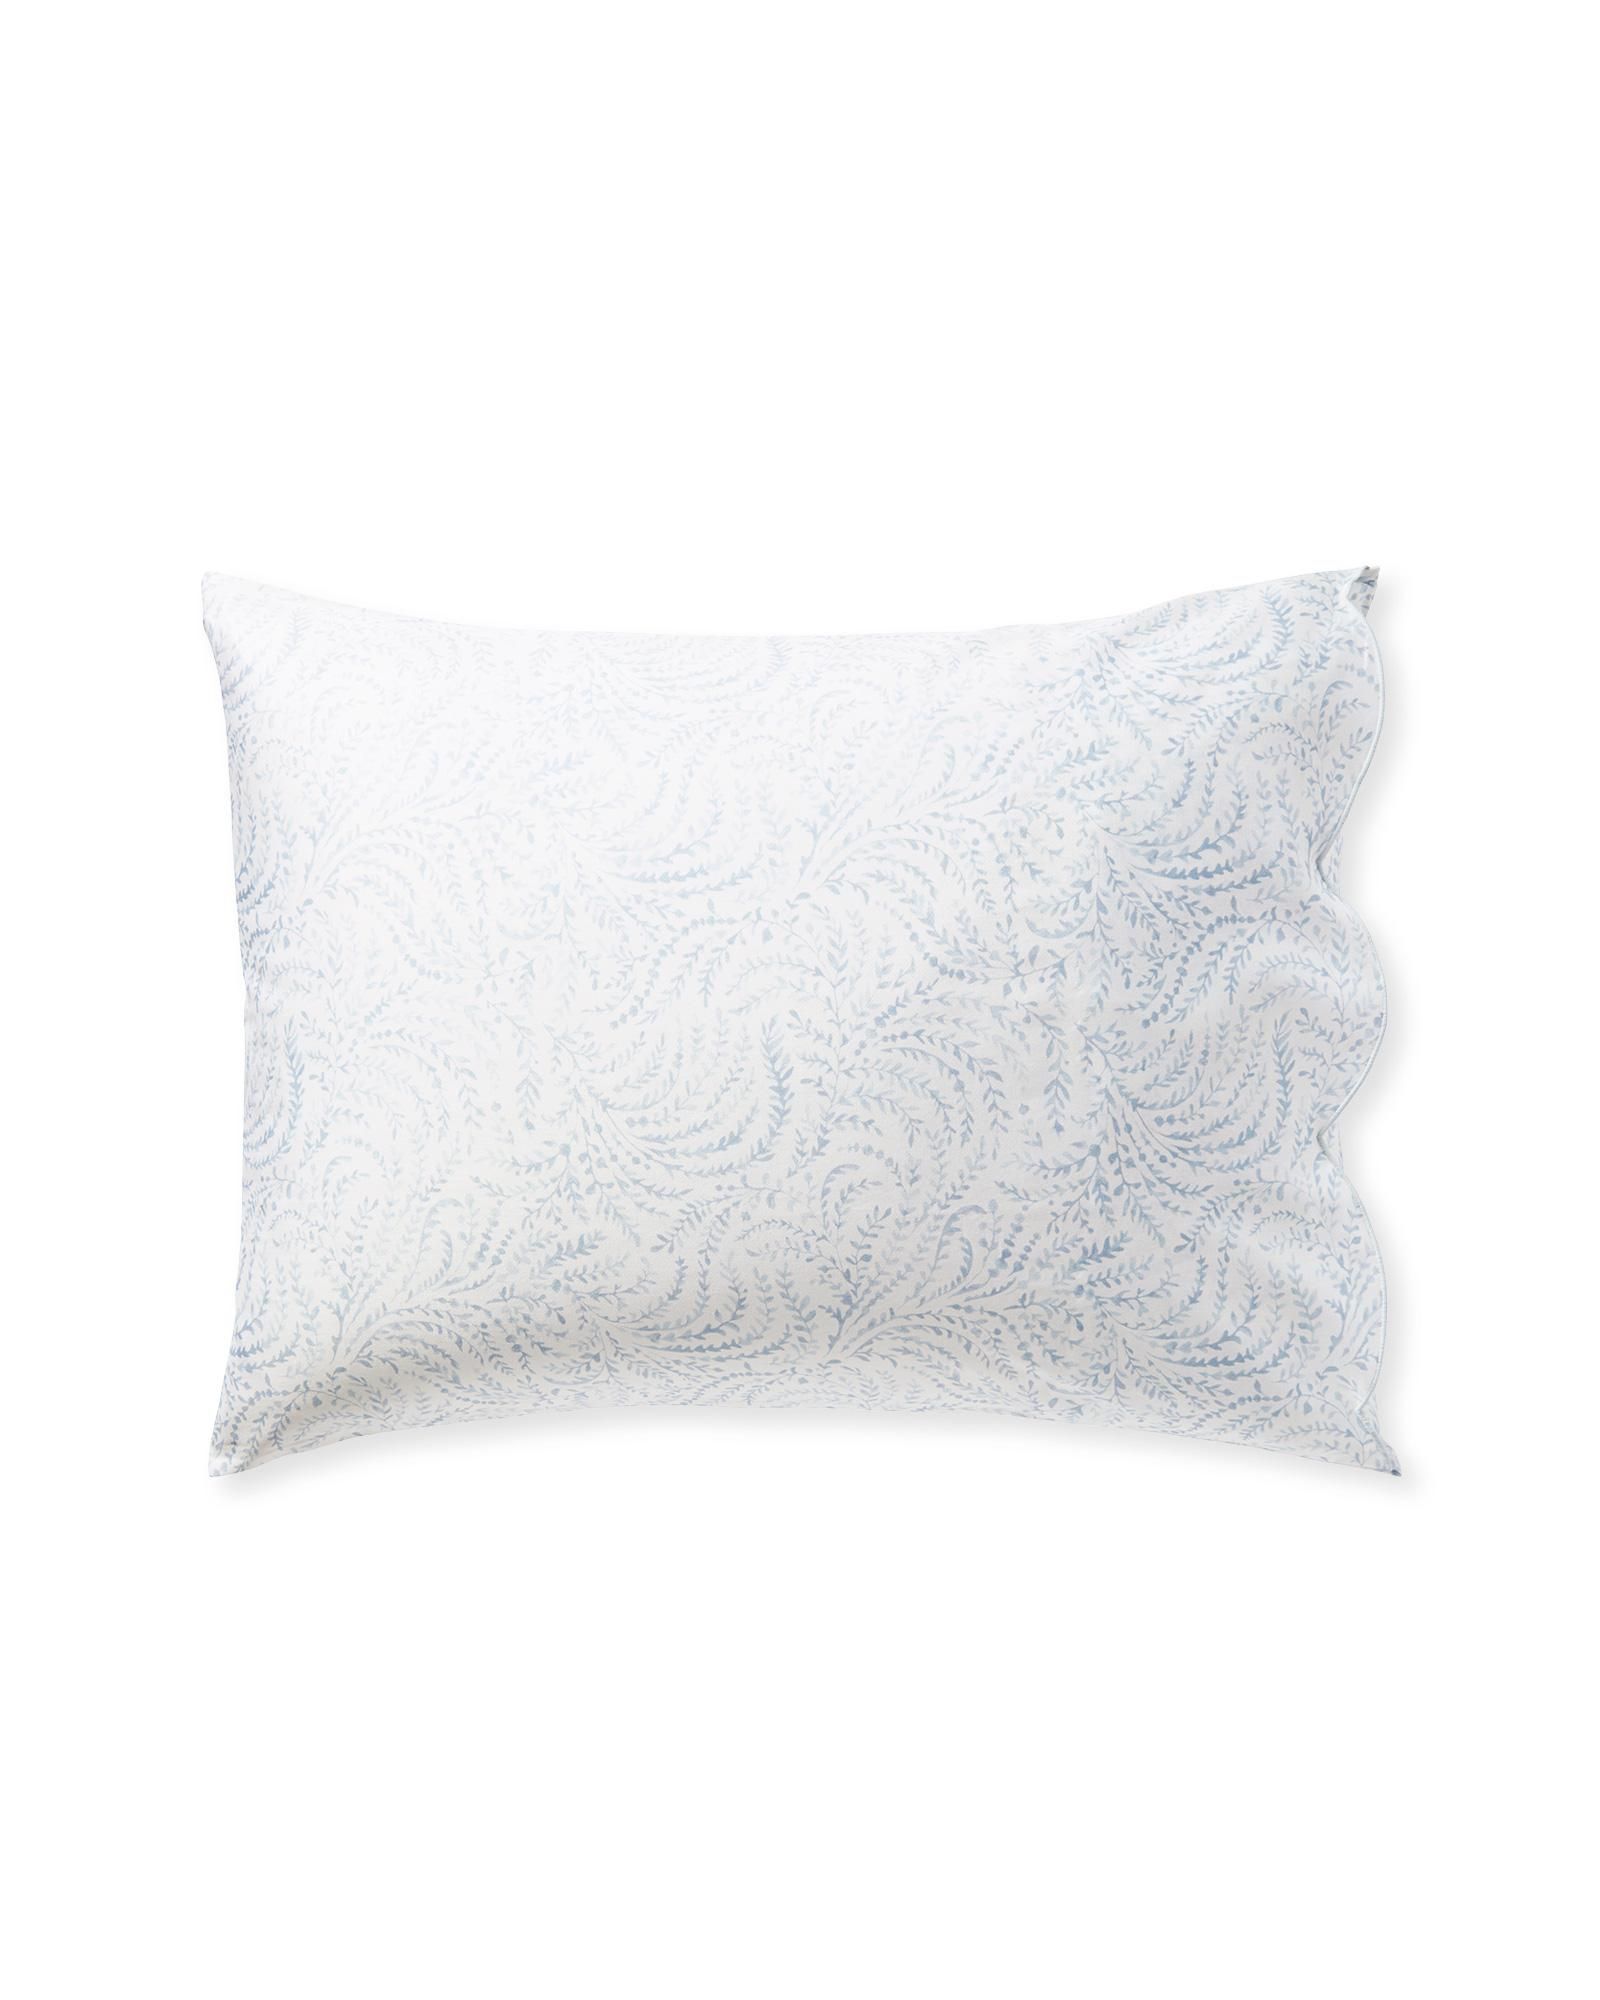 Priano Sateen Pillowcases (Set of 2) | Serena and Lily